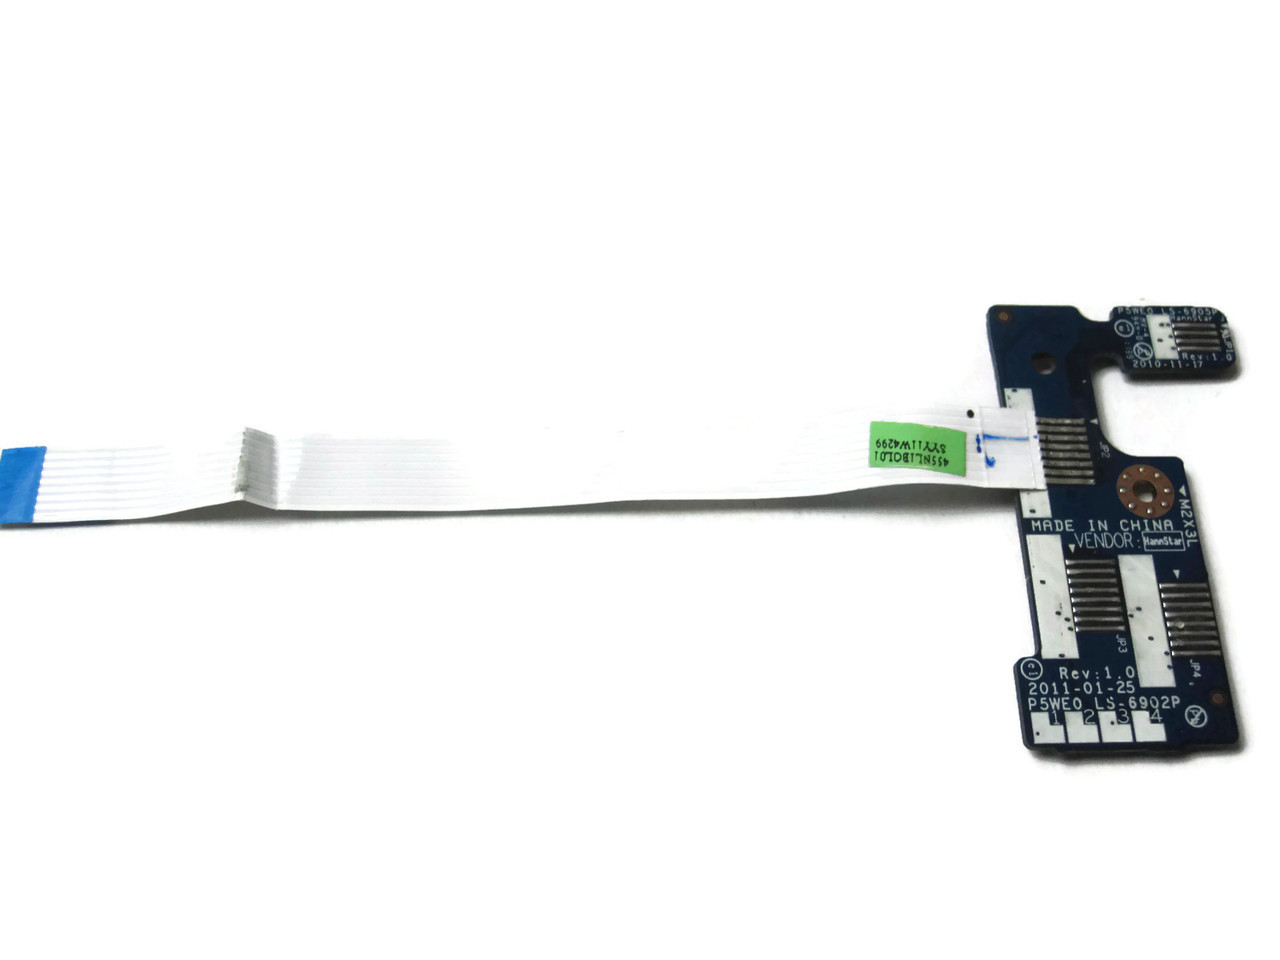 Zahara Power Button Board with Cable Replacement for Acer Aspire 5750 5750G 5755 5755G P5WE0 LS-6902P 